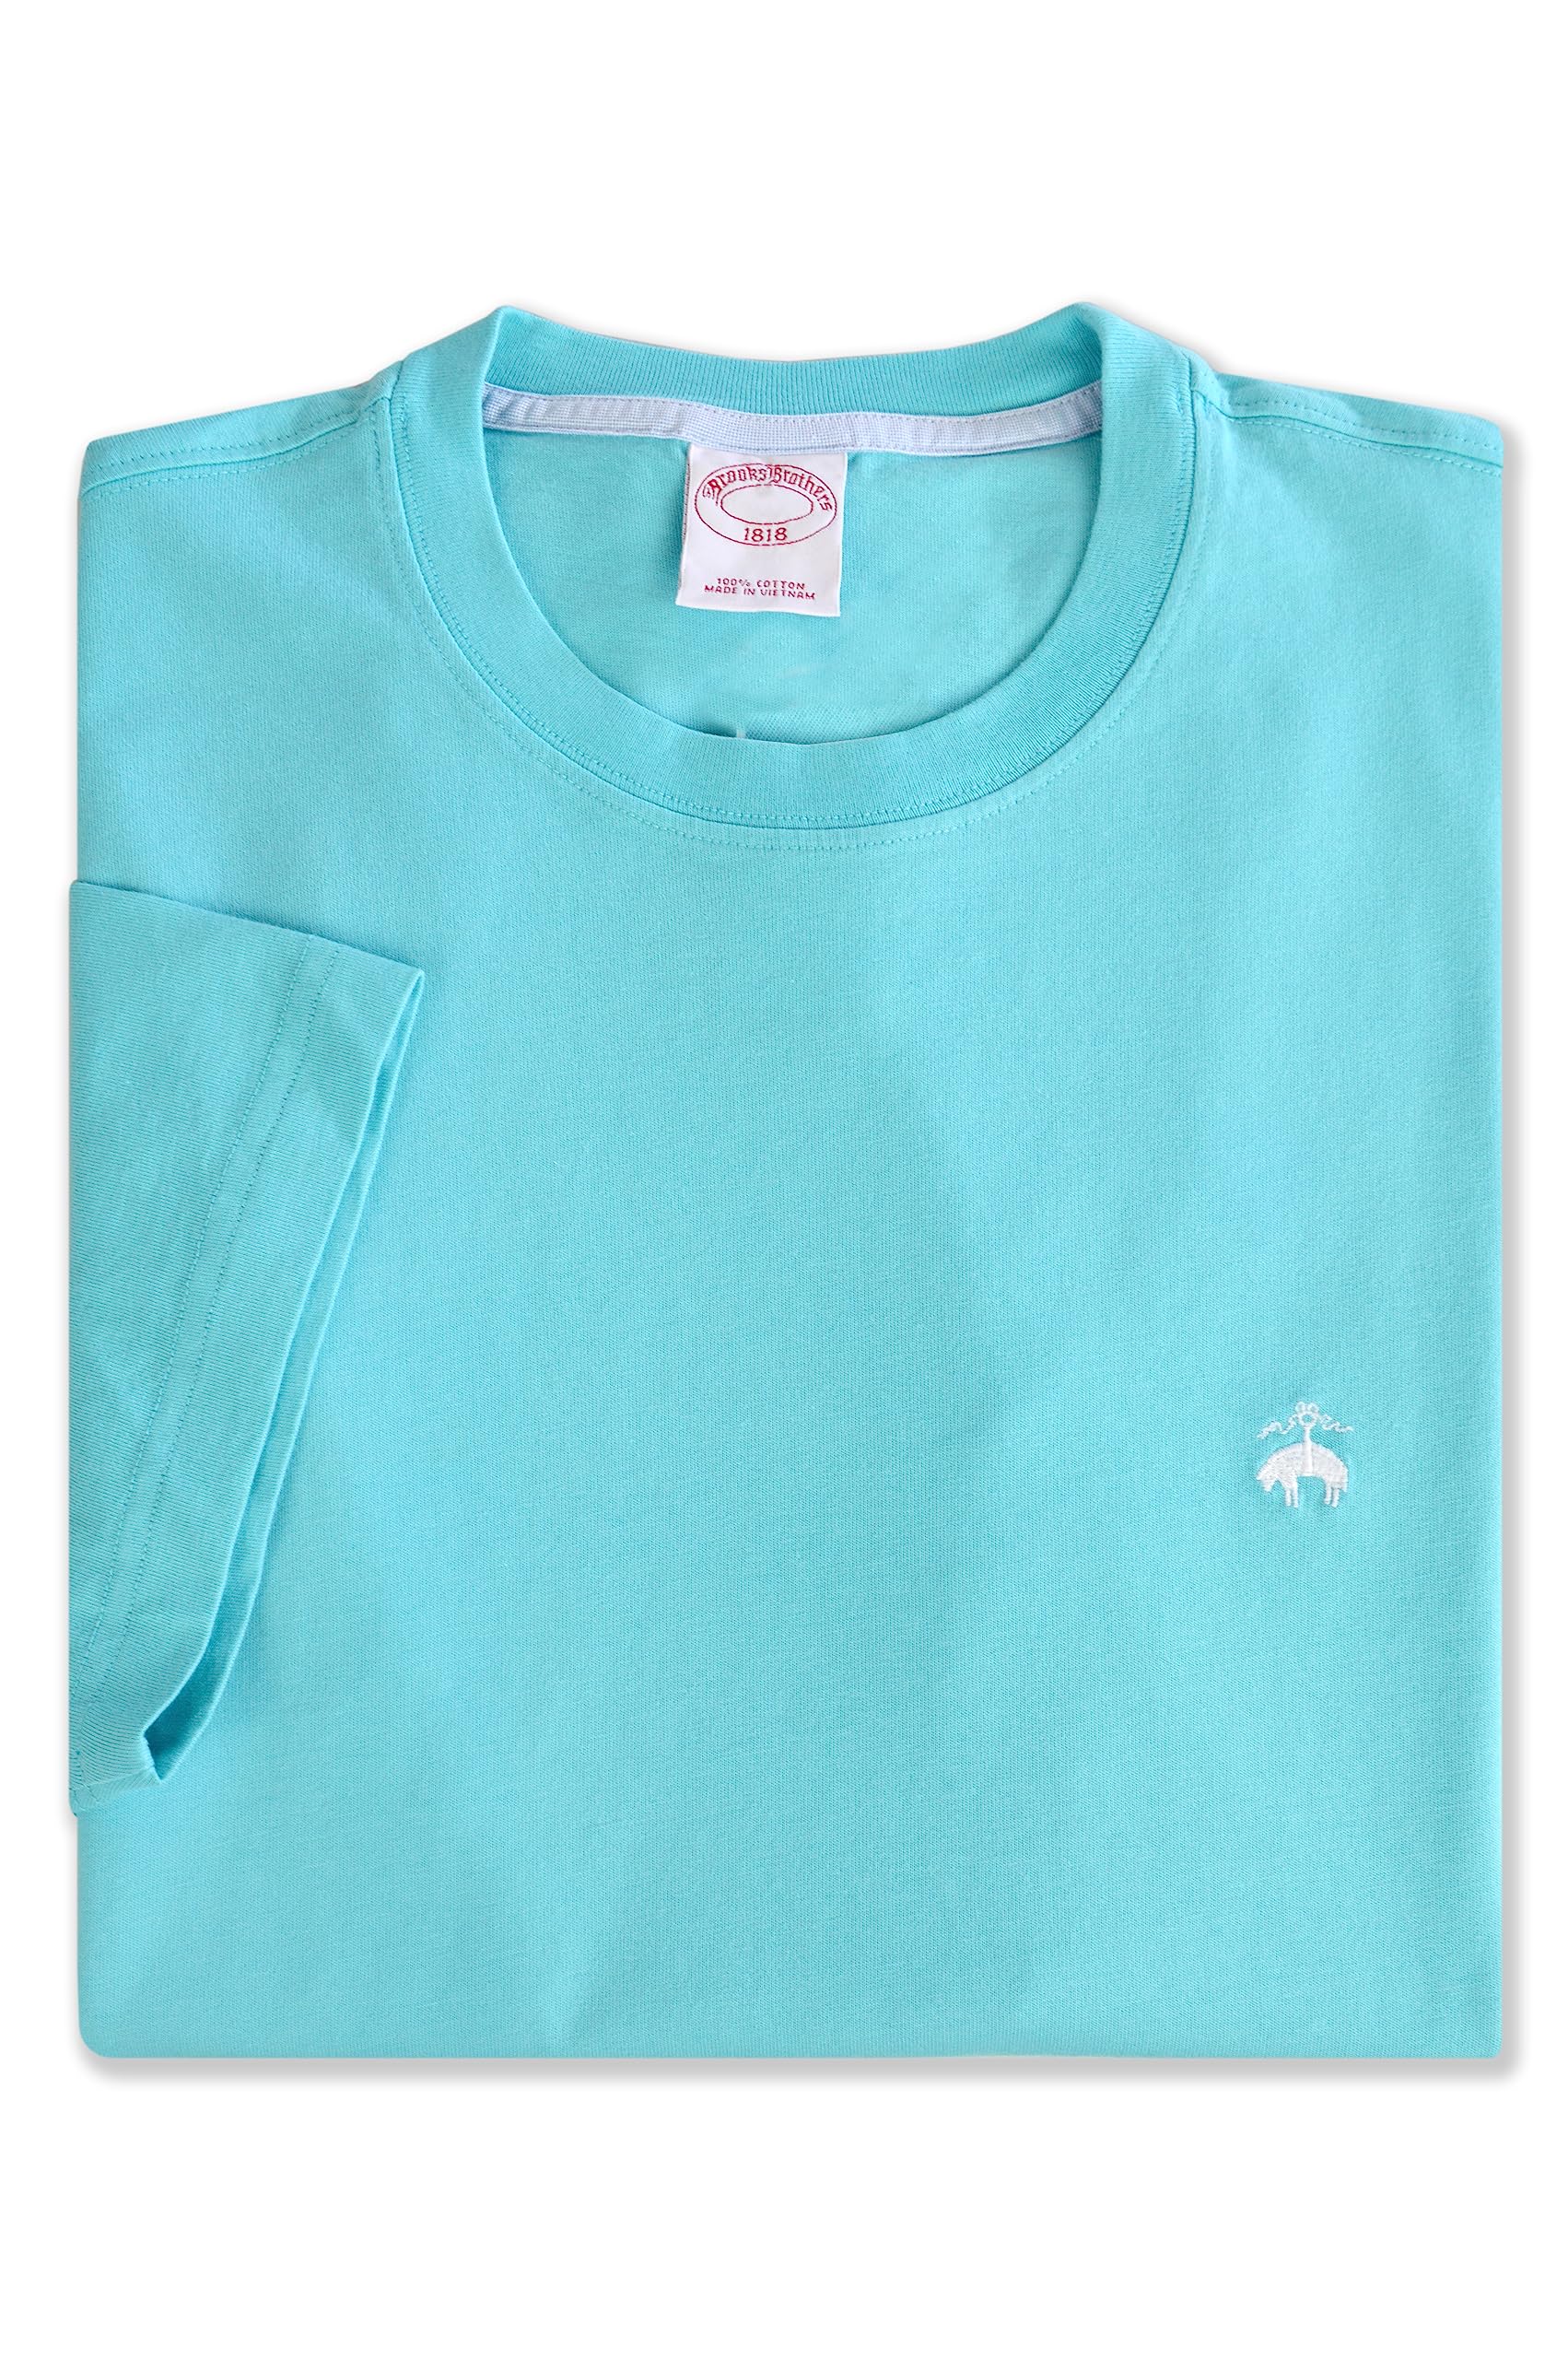 Brooks Brothers Herren Classic Fit All Cotton White Embroidery Crewneck Short Sleeve Tee T-Shirt, aqua blue, Large